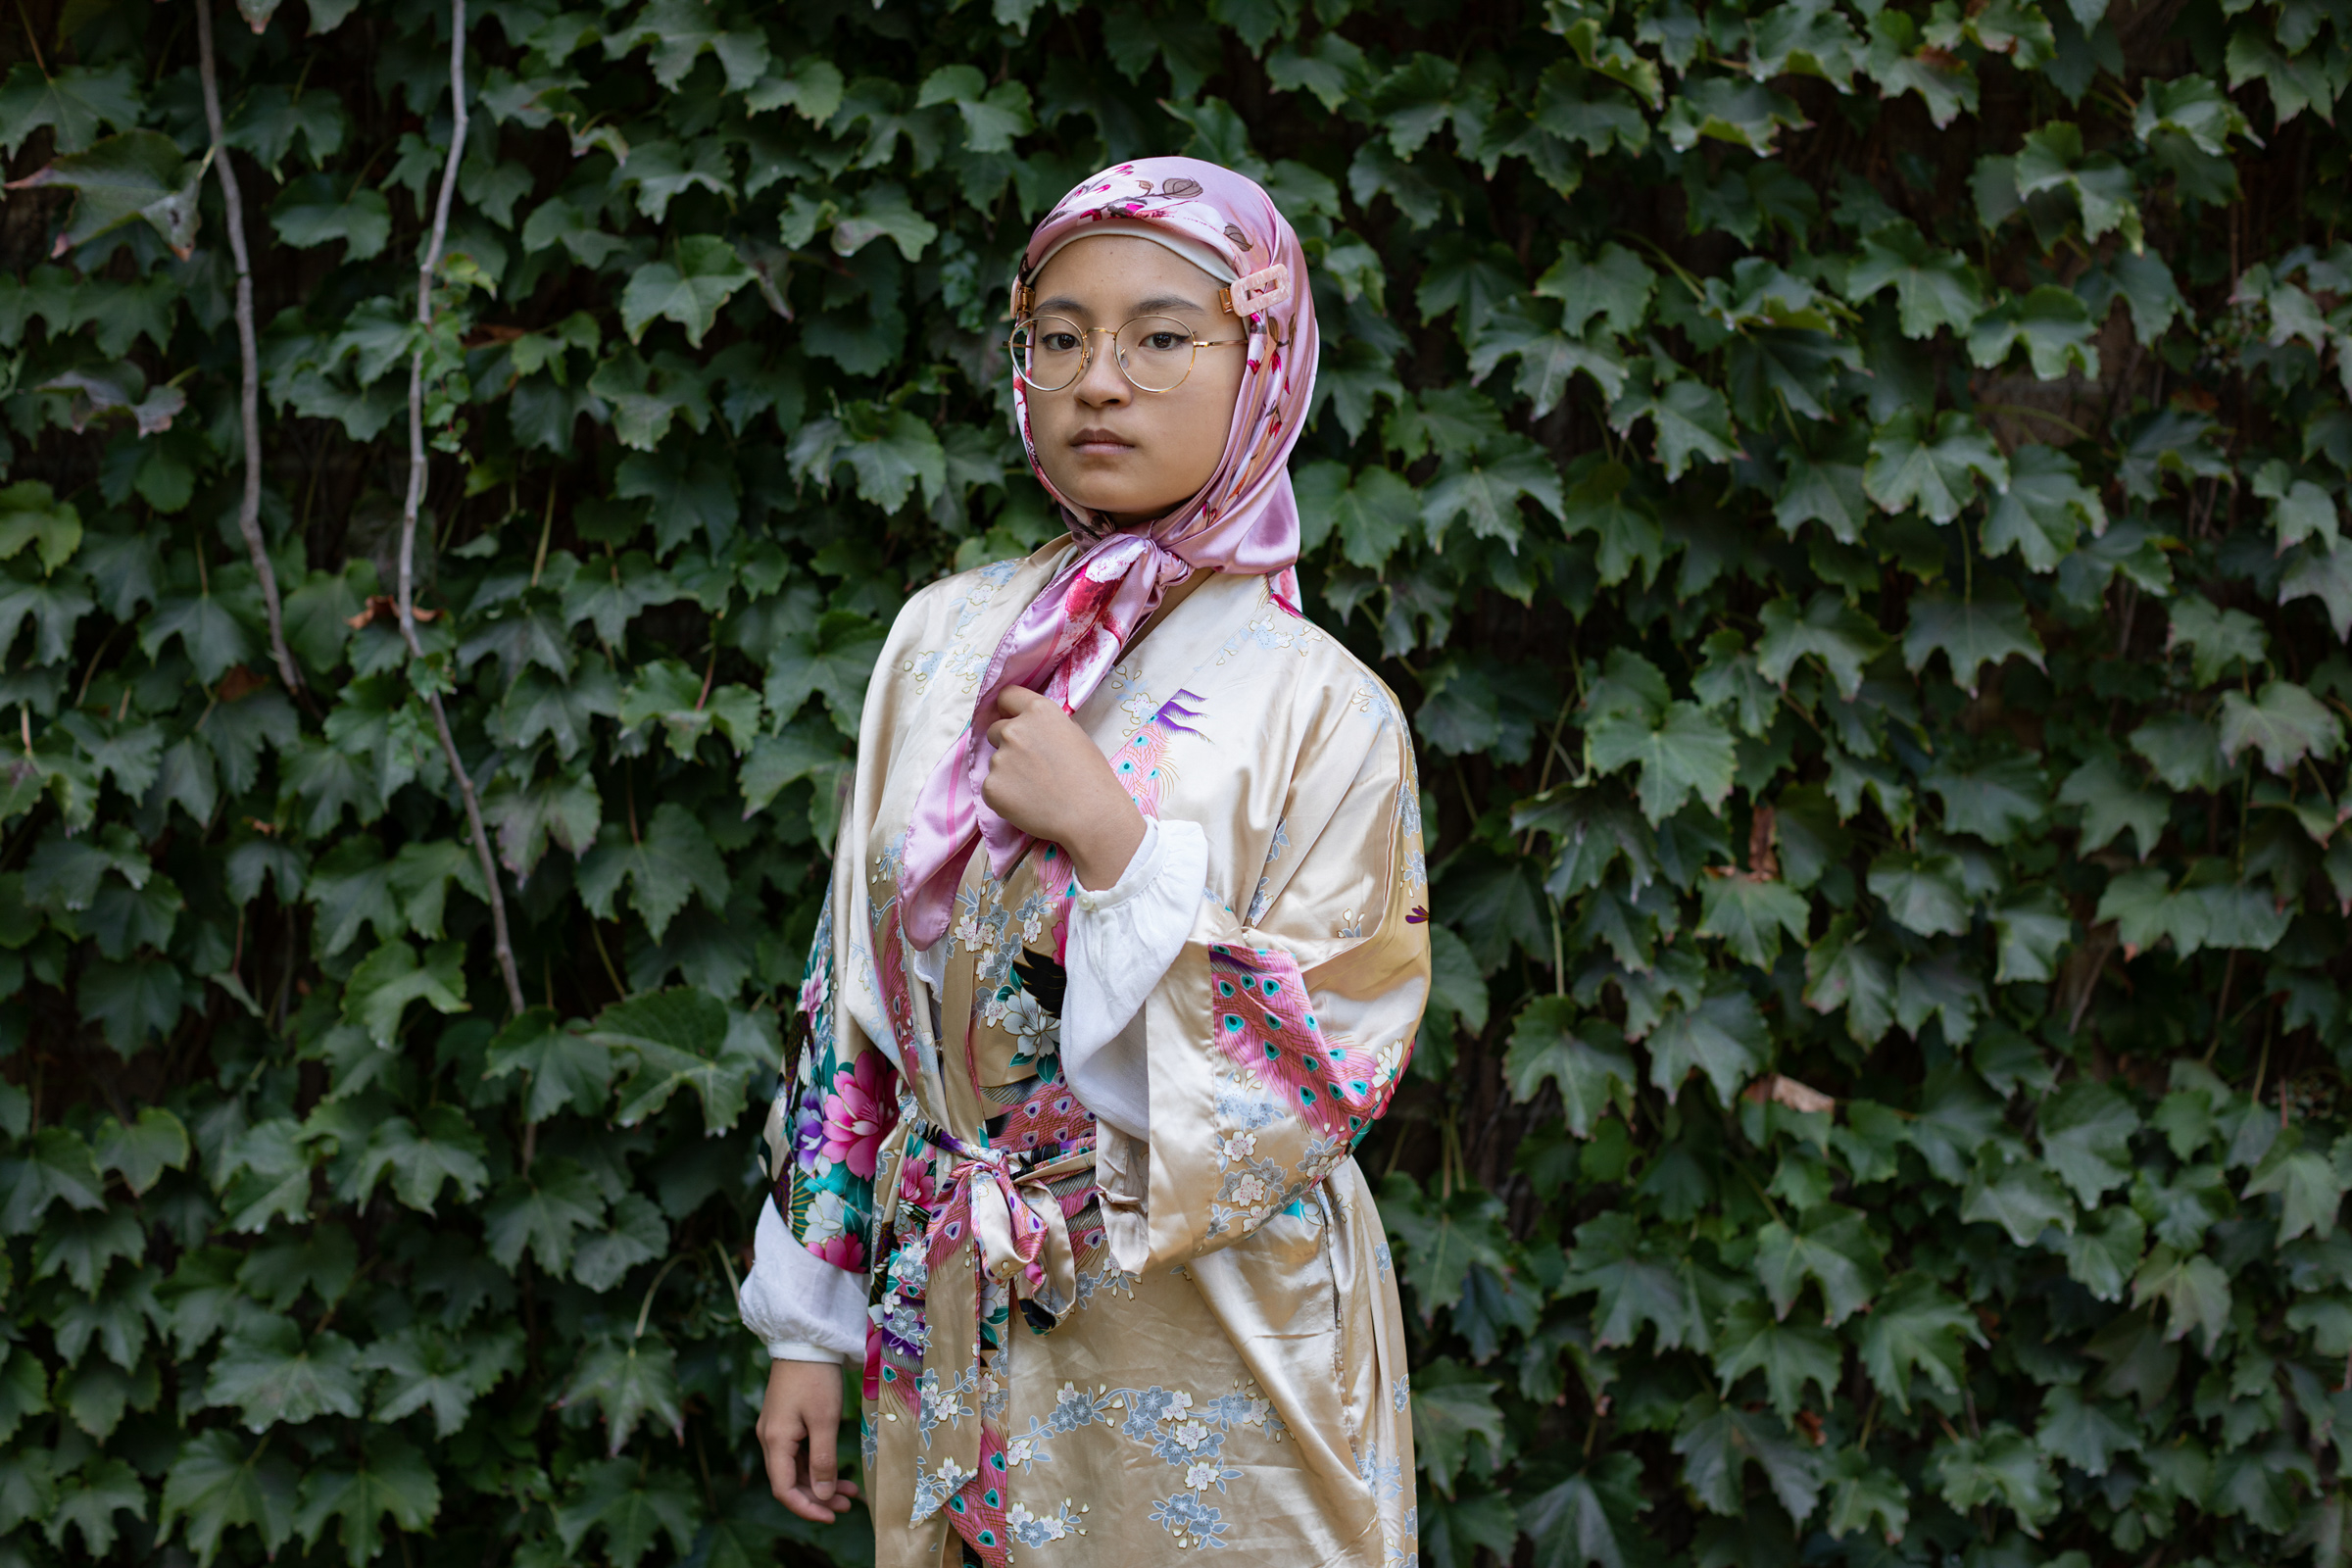 Mahtab Hussain, Ruisi Lui, 2021, from the series Ocean in a Drop: Muslims in Toronto. Courtesy of the artist and Chris Boot, © Mahtab Hussain 2021